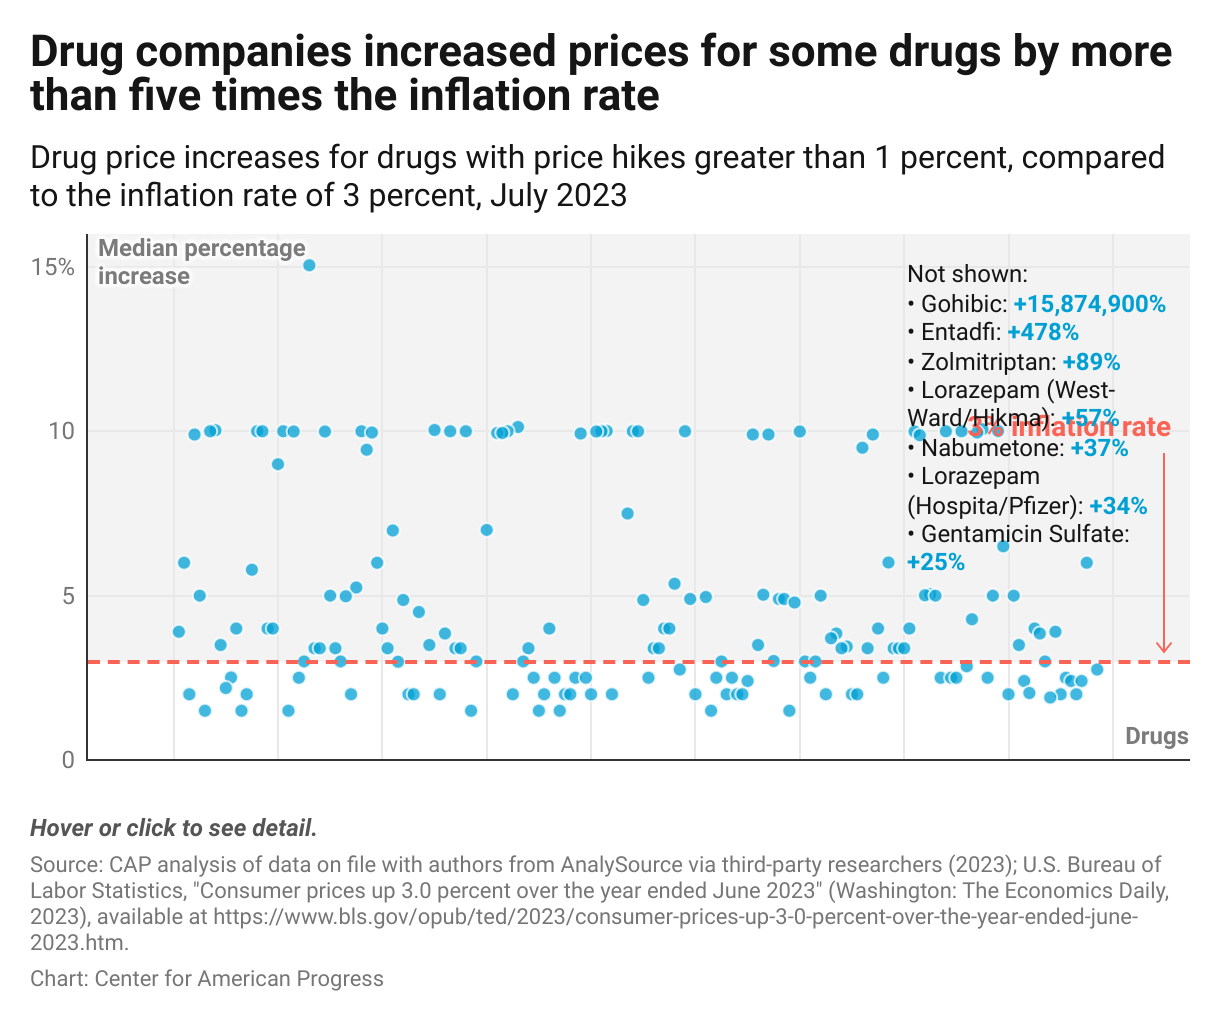 A dot chart displaying the price increase for each drug with price increases greater than 1 percent in July 2023 compared to the 3 percent inflation rate showing that drug companies increased the prices for 112 drugs above the inflation rate.